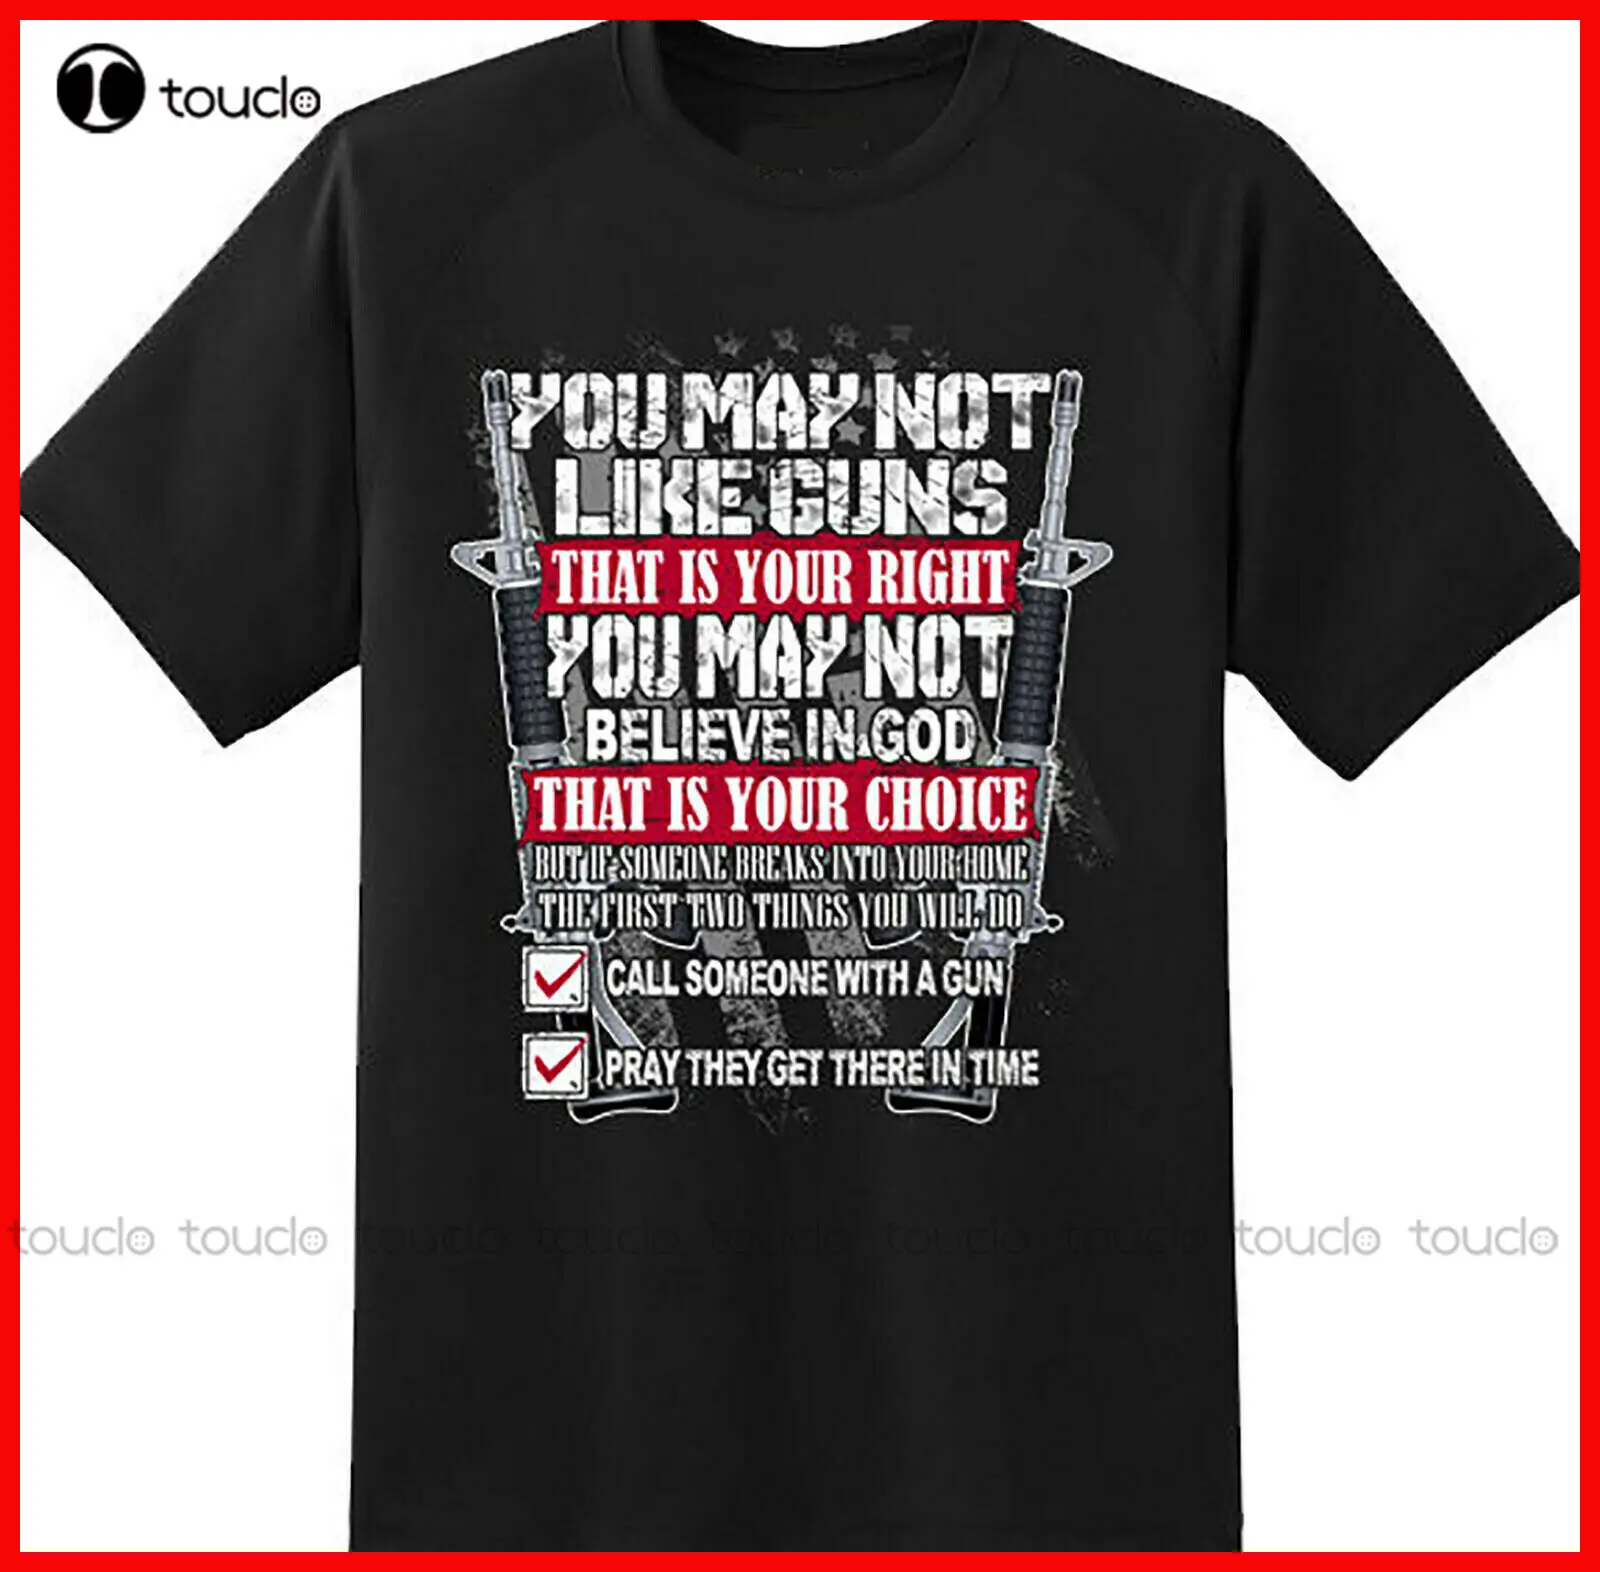 

New You May Not Like Guns Patriotic American 2Nd Amendment T Shirt New Graphic Tee T Shirts For Women Cotton Tee Xs-5Xl Unisex